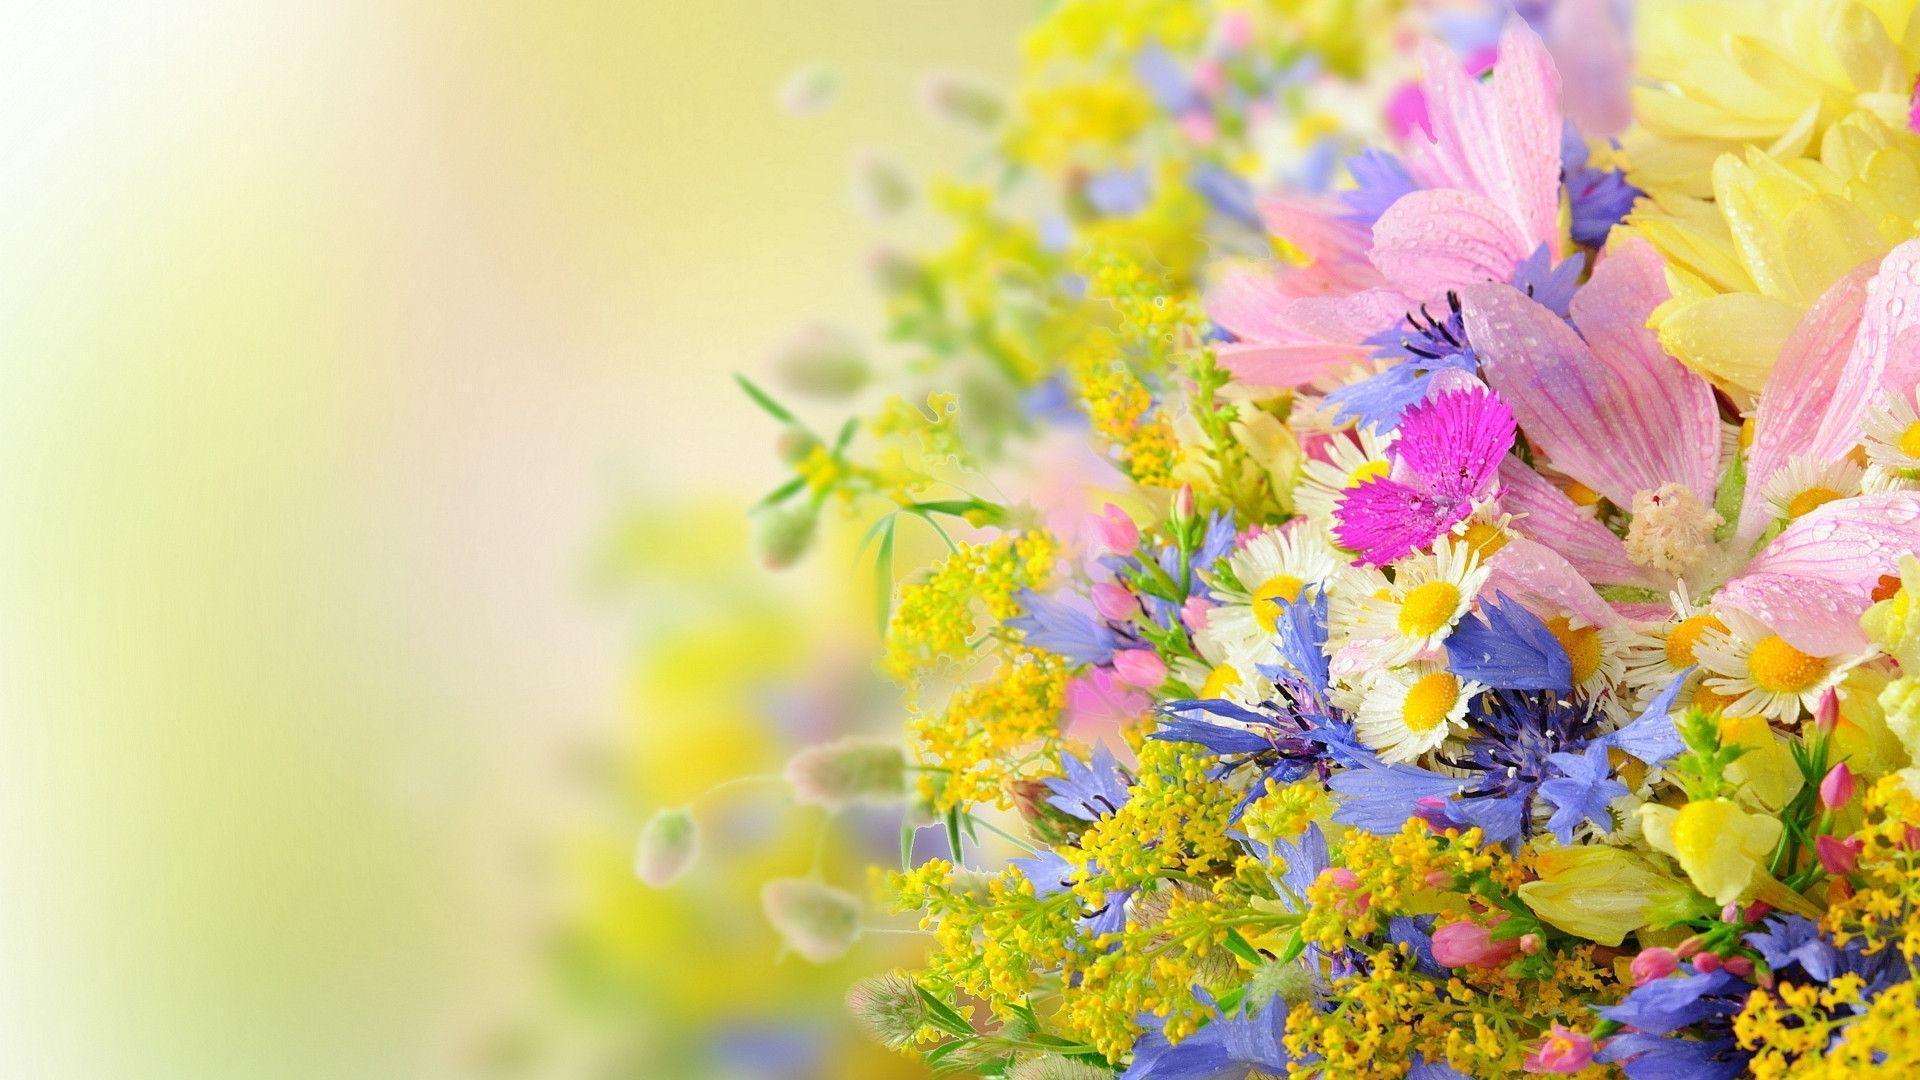 15 Incomparable summer flower desktop wallpaper You Can Save It For ...